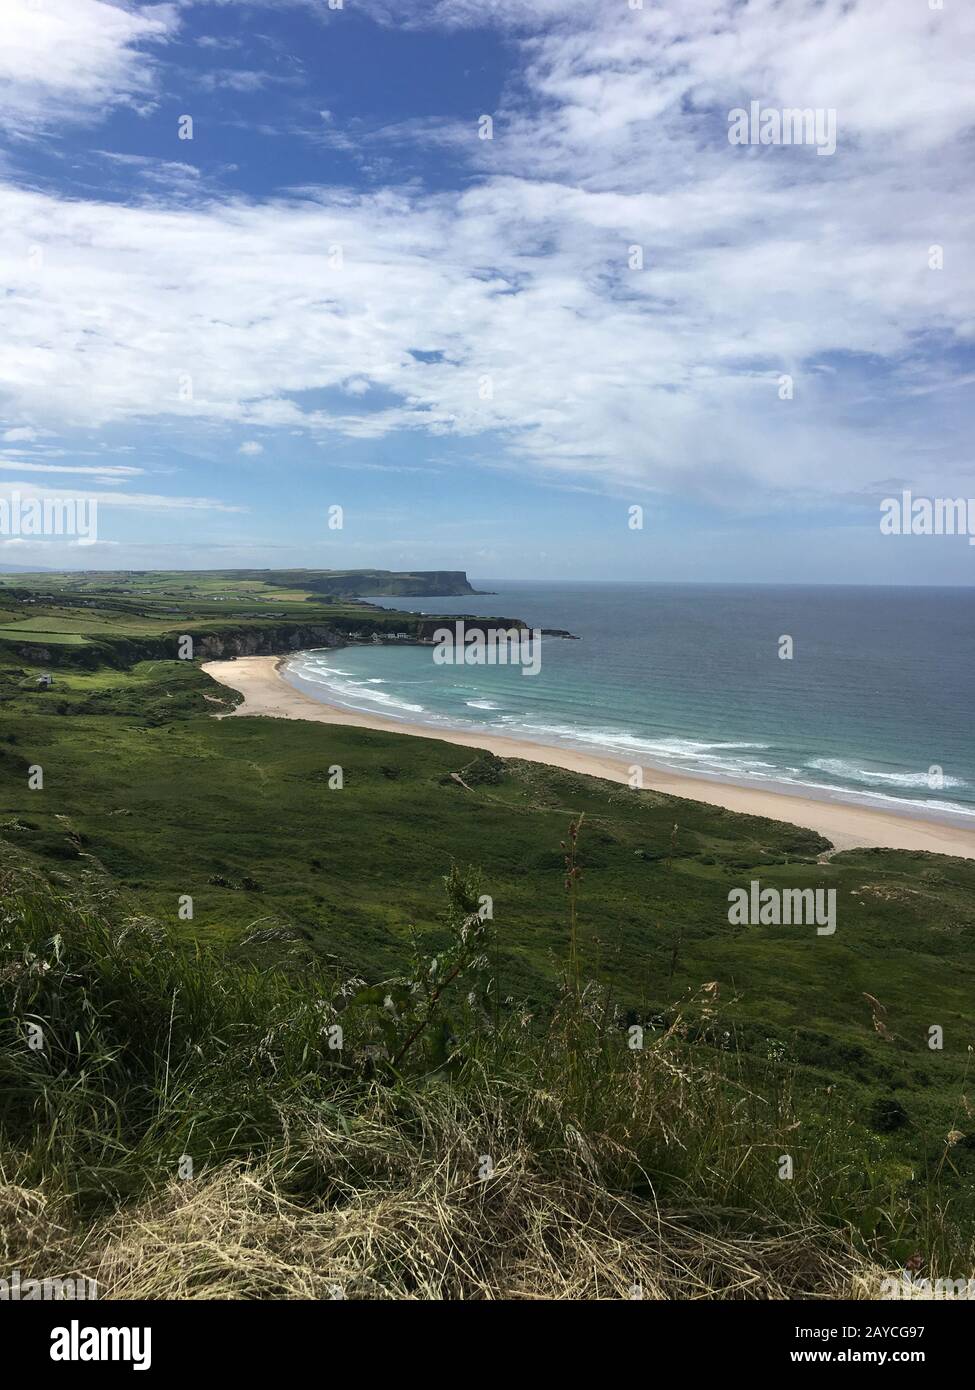 Photos of a beach in Ballycastle, Northern Ireland taken from a viewing point on the cliff side Stock Photo